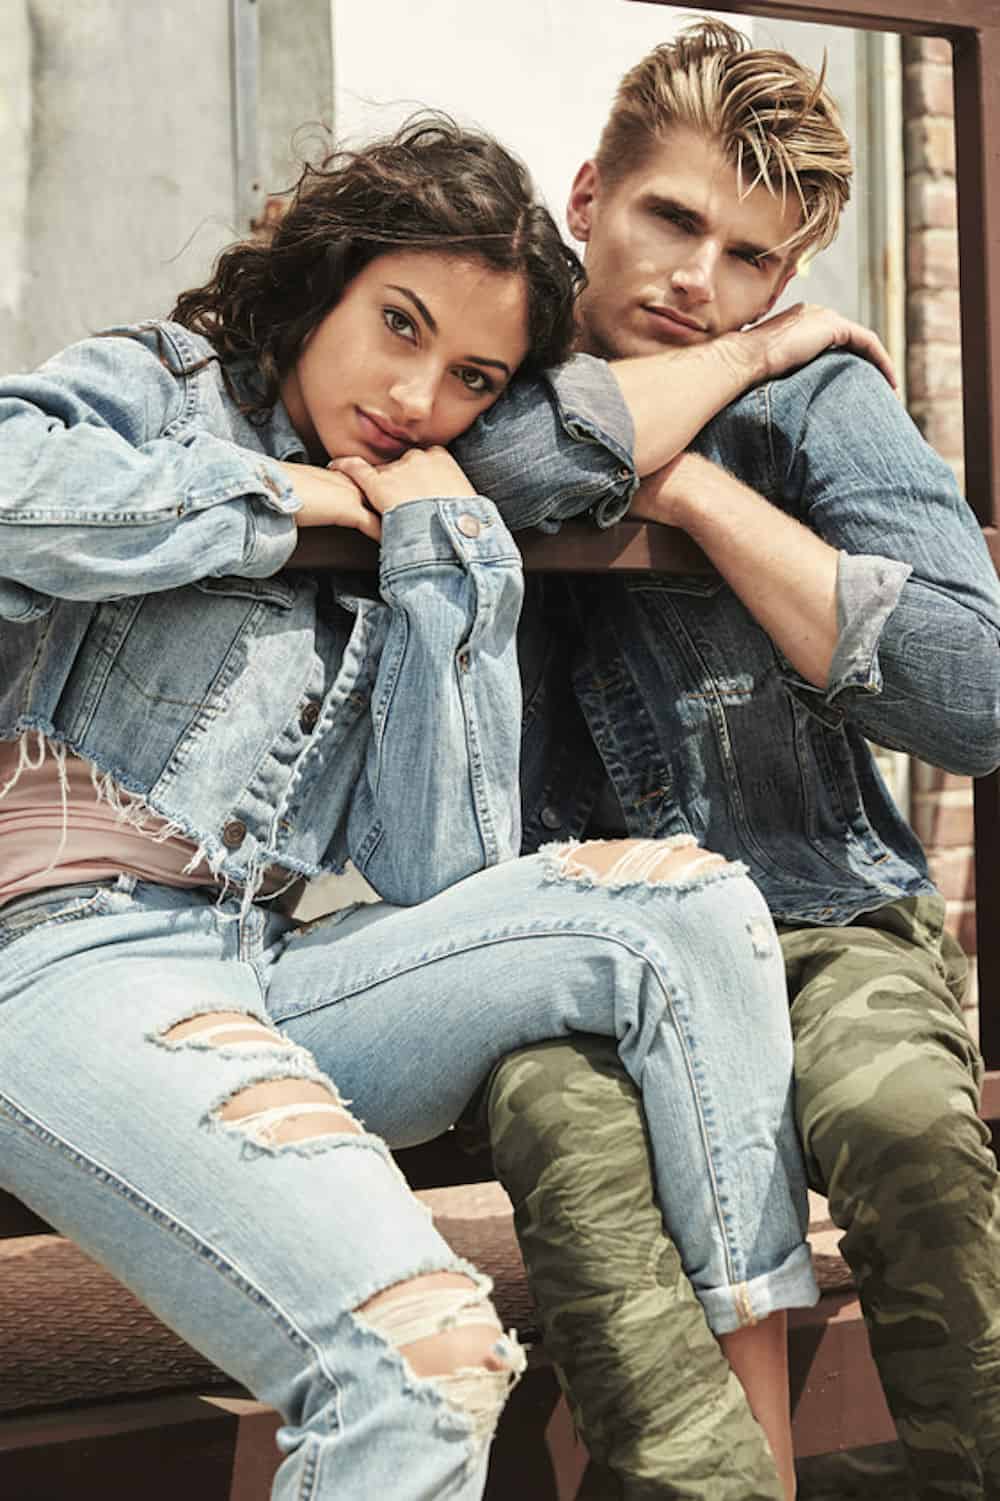 image of a guy and a girl both wearing denim jackets leaning against each other